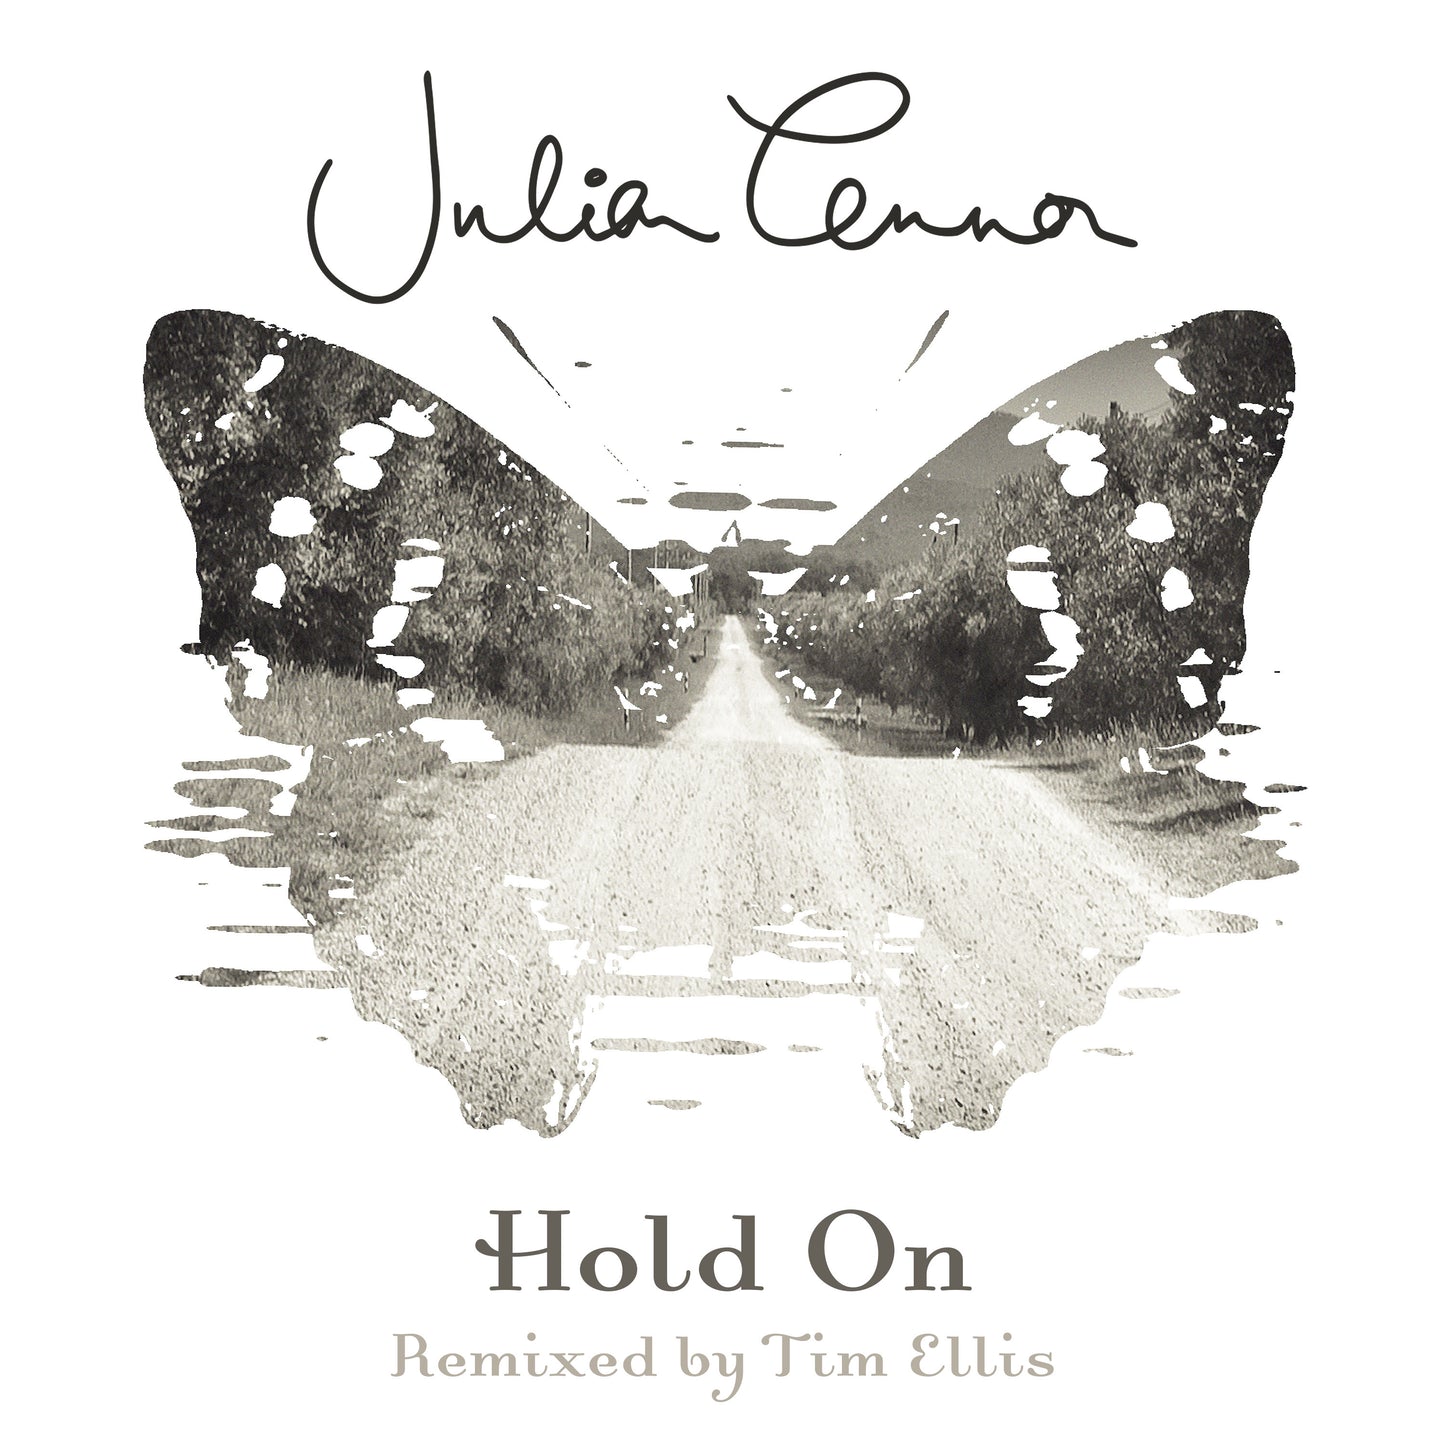 Julian Lennon - Hold On (Remixed by Tim Ellis) *Note for mobile devices